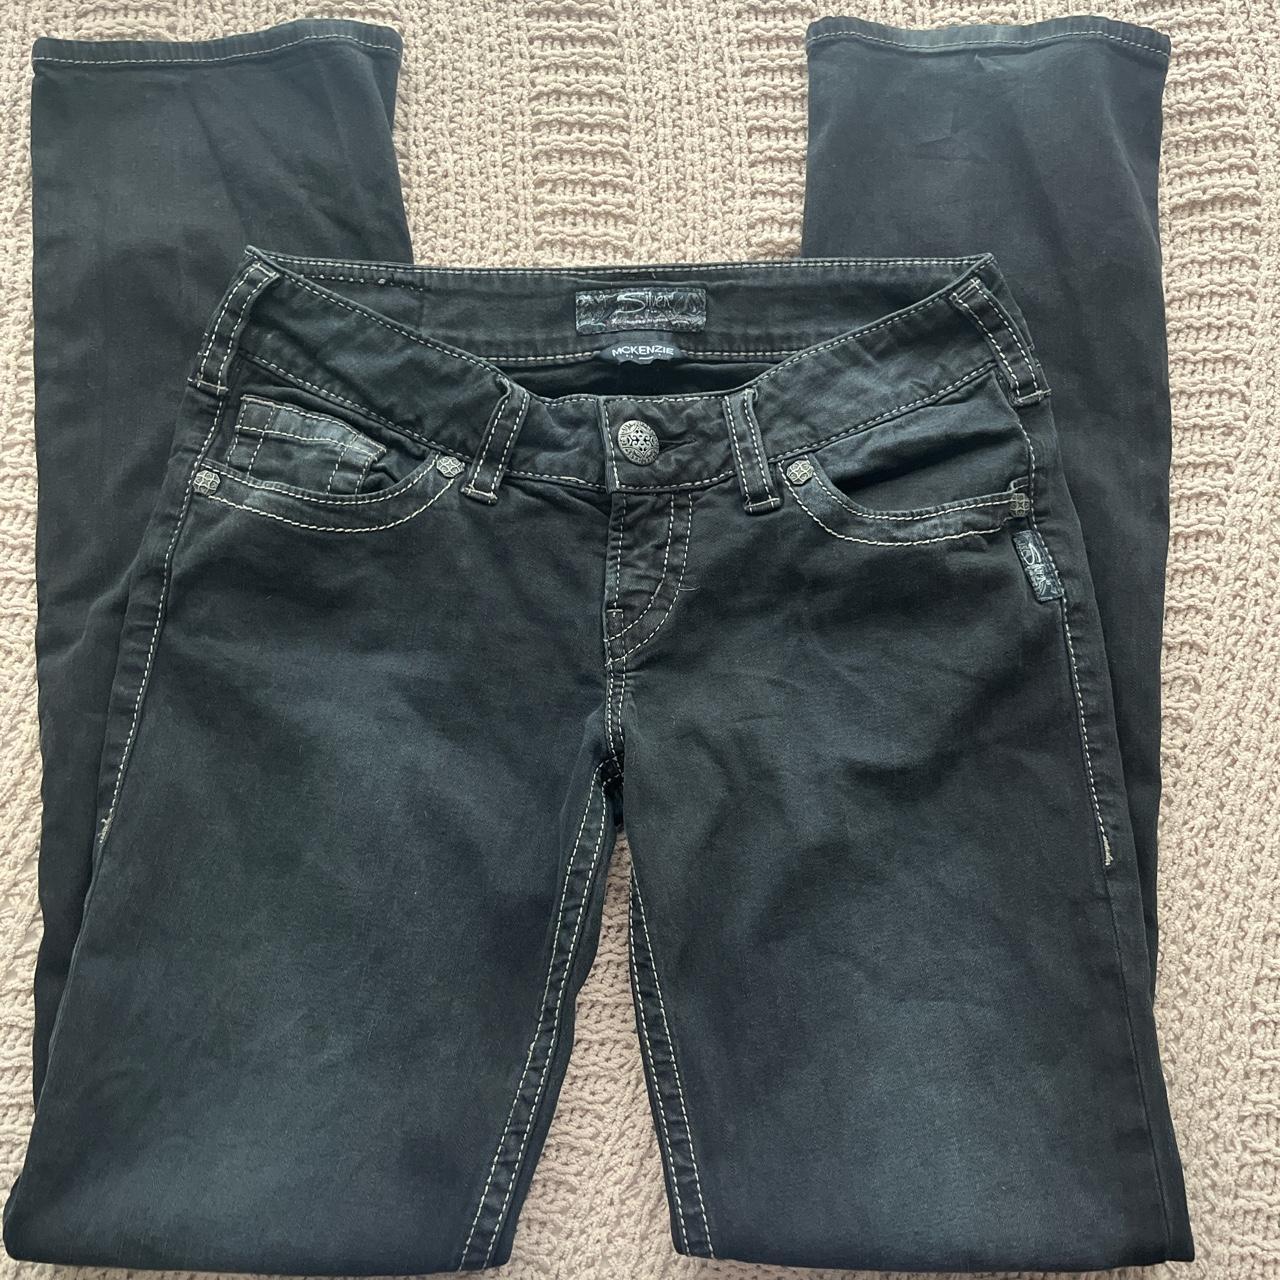 Silver Jeans Co. Women's Black and Grey Jeans | Depop